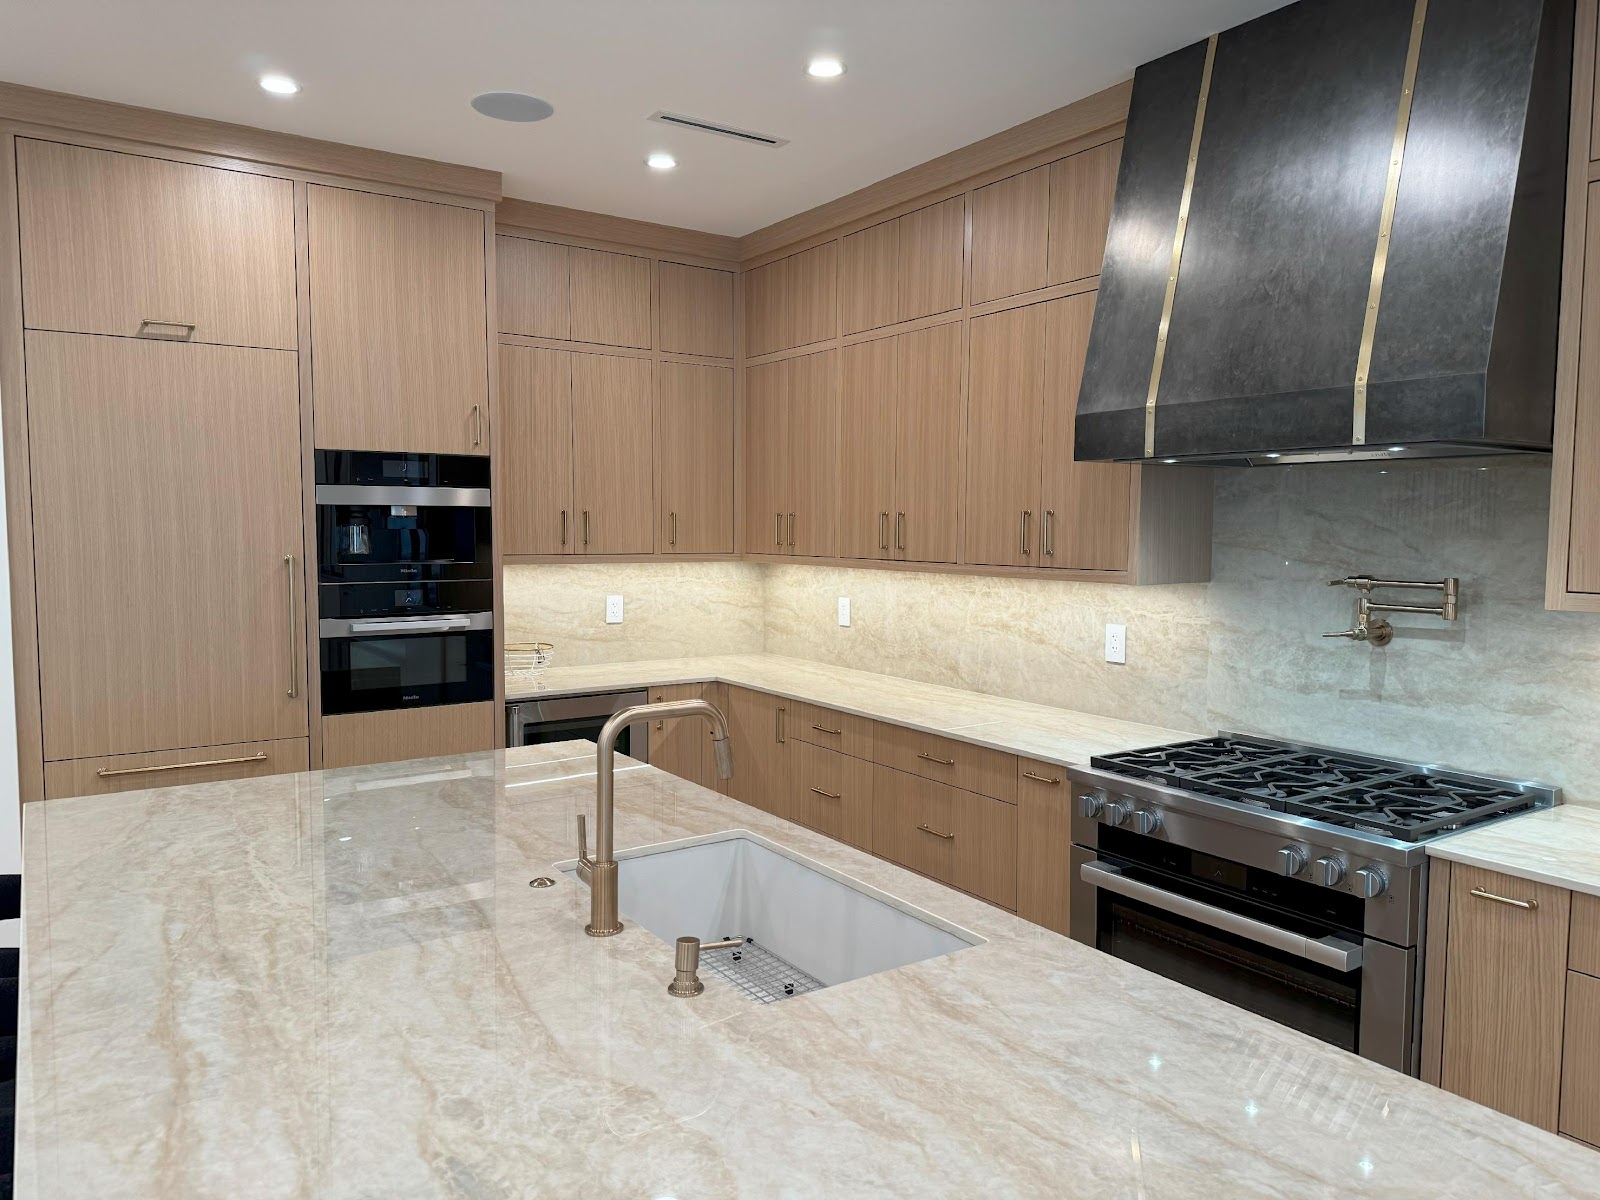 A kitchen with a marble countertop
